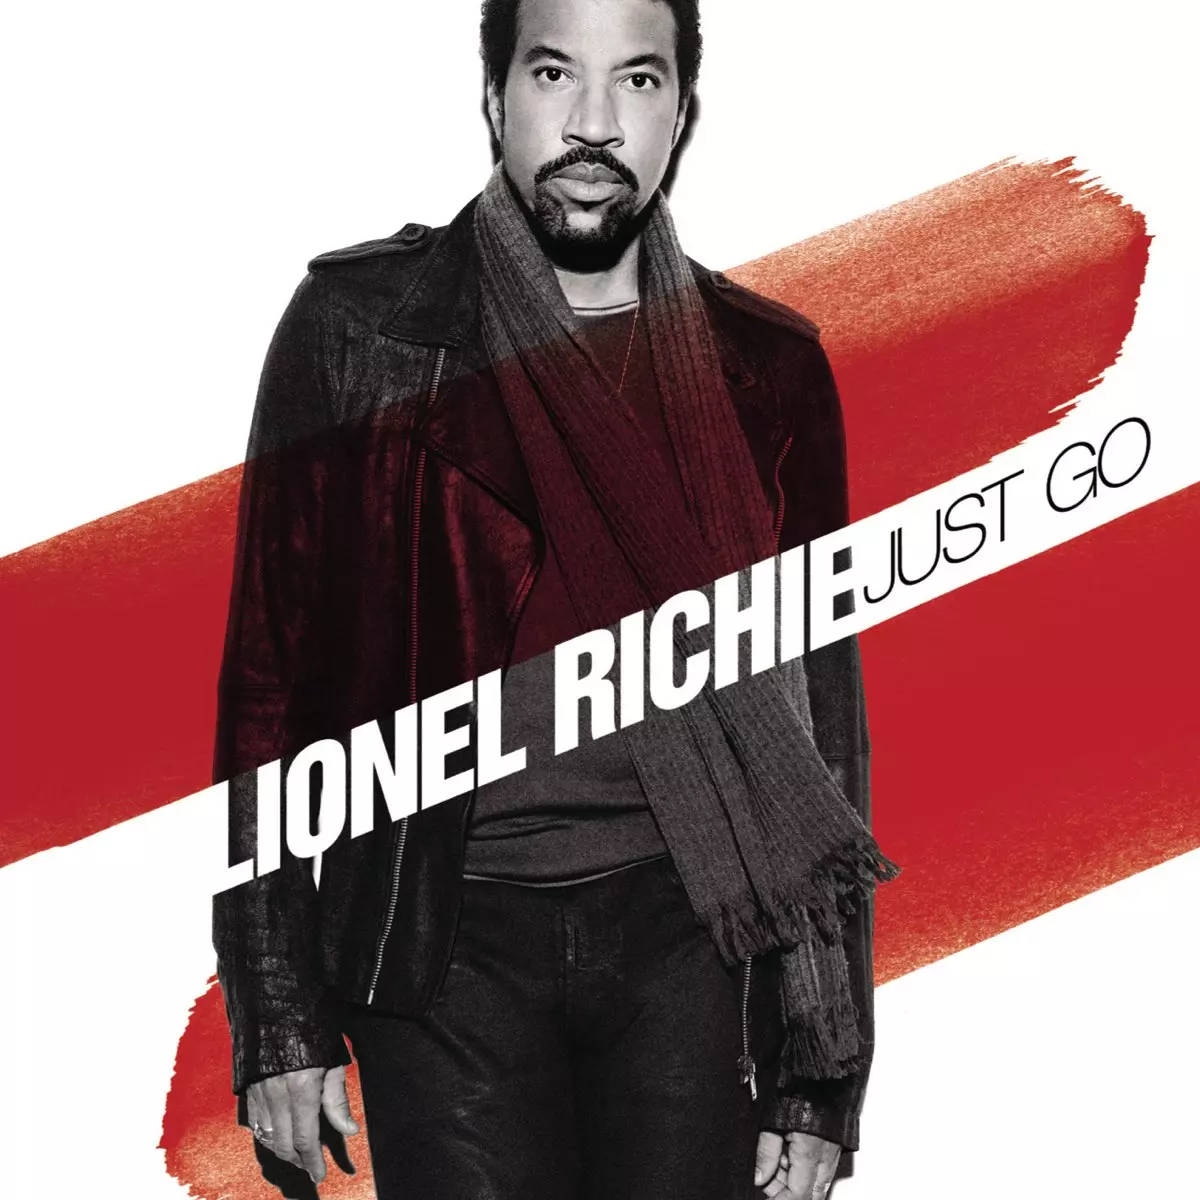 Just Go by Lionel Richie on Apple Music